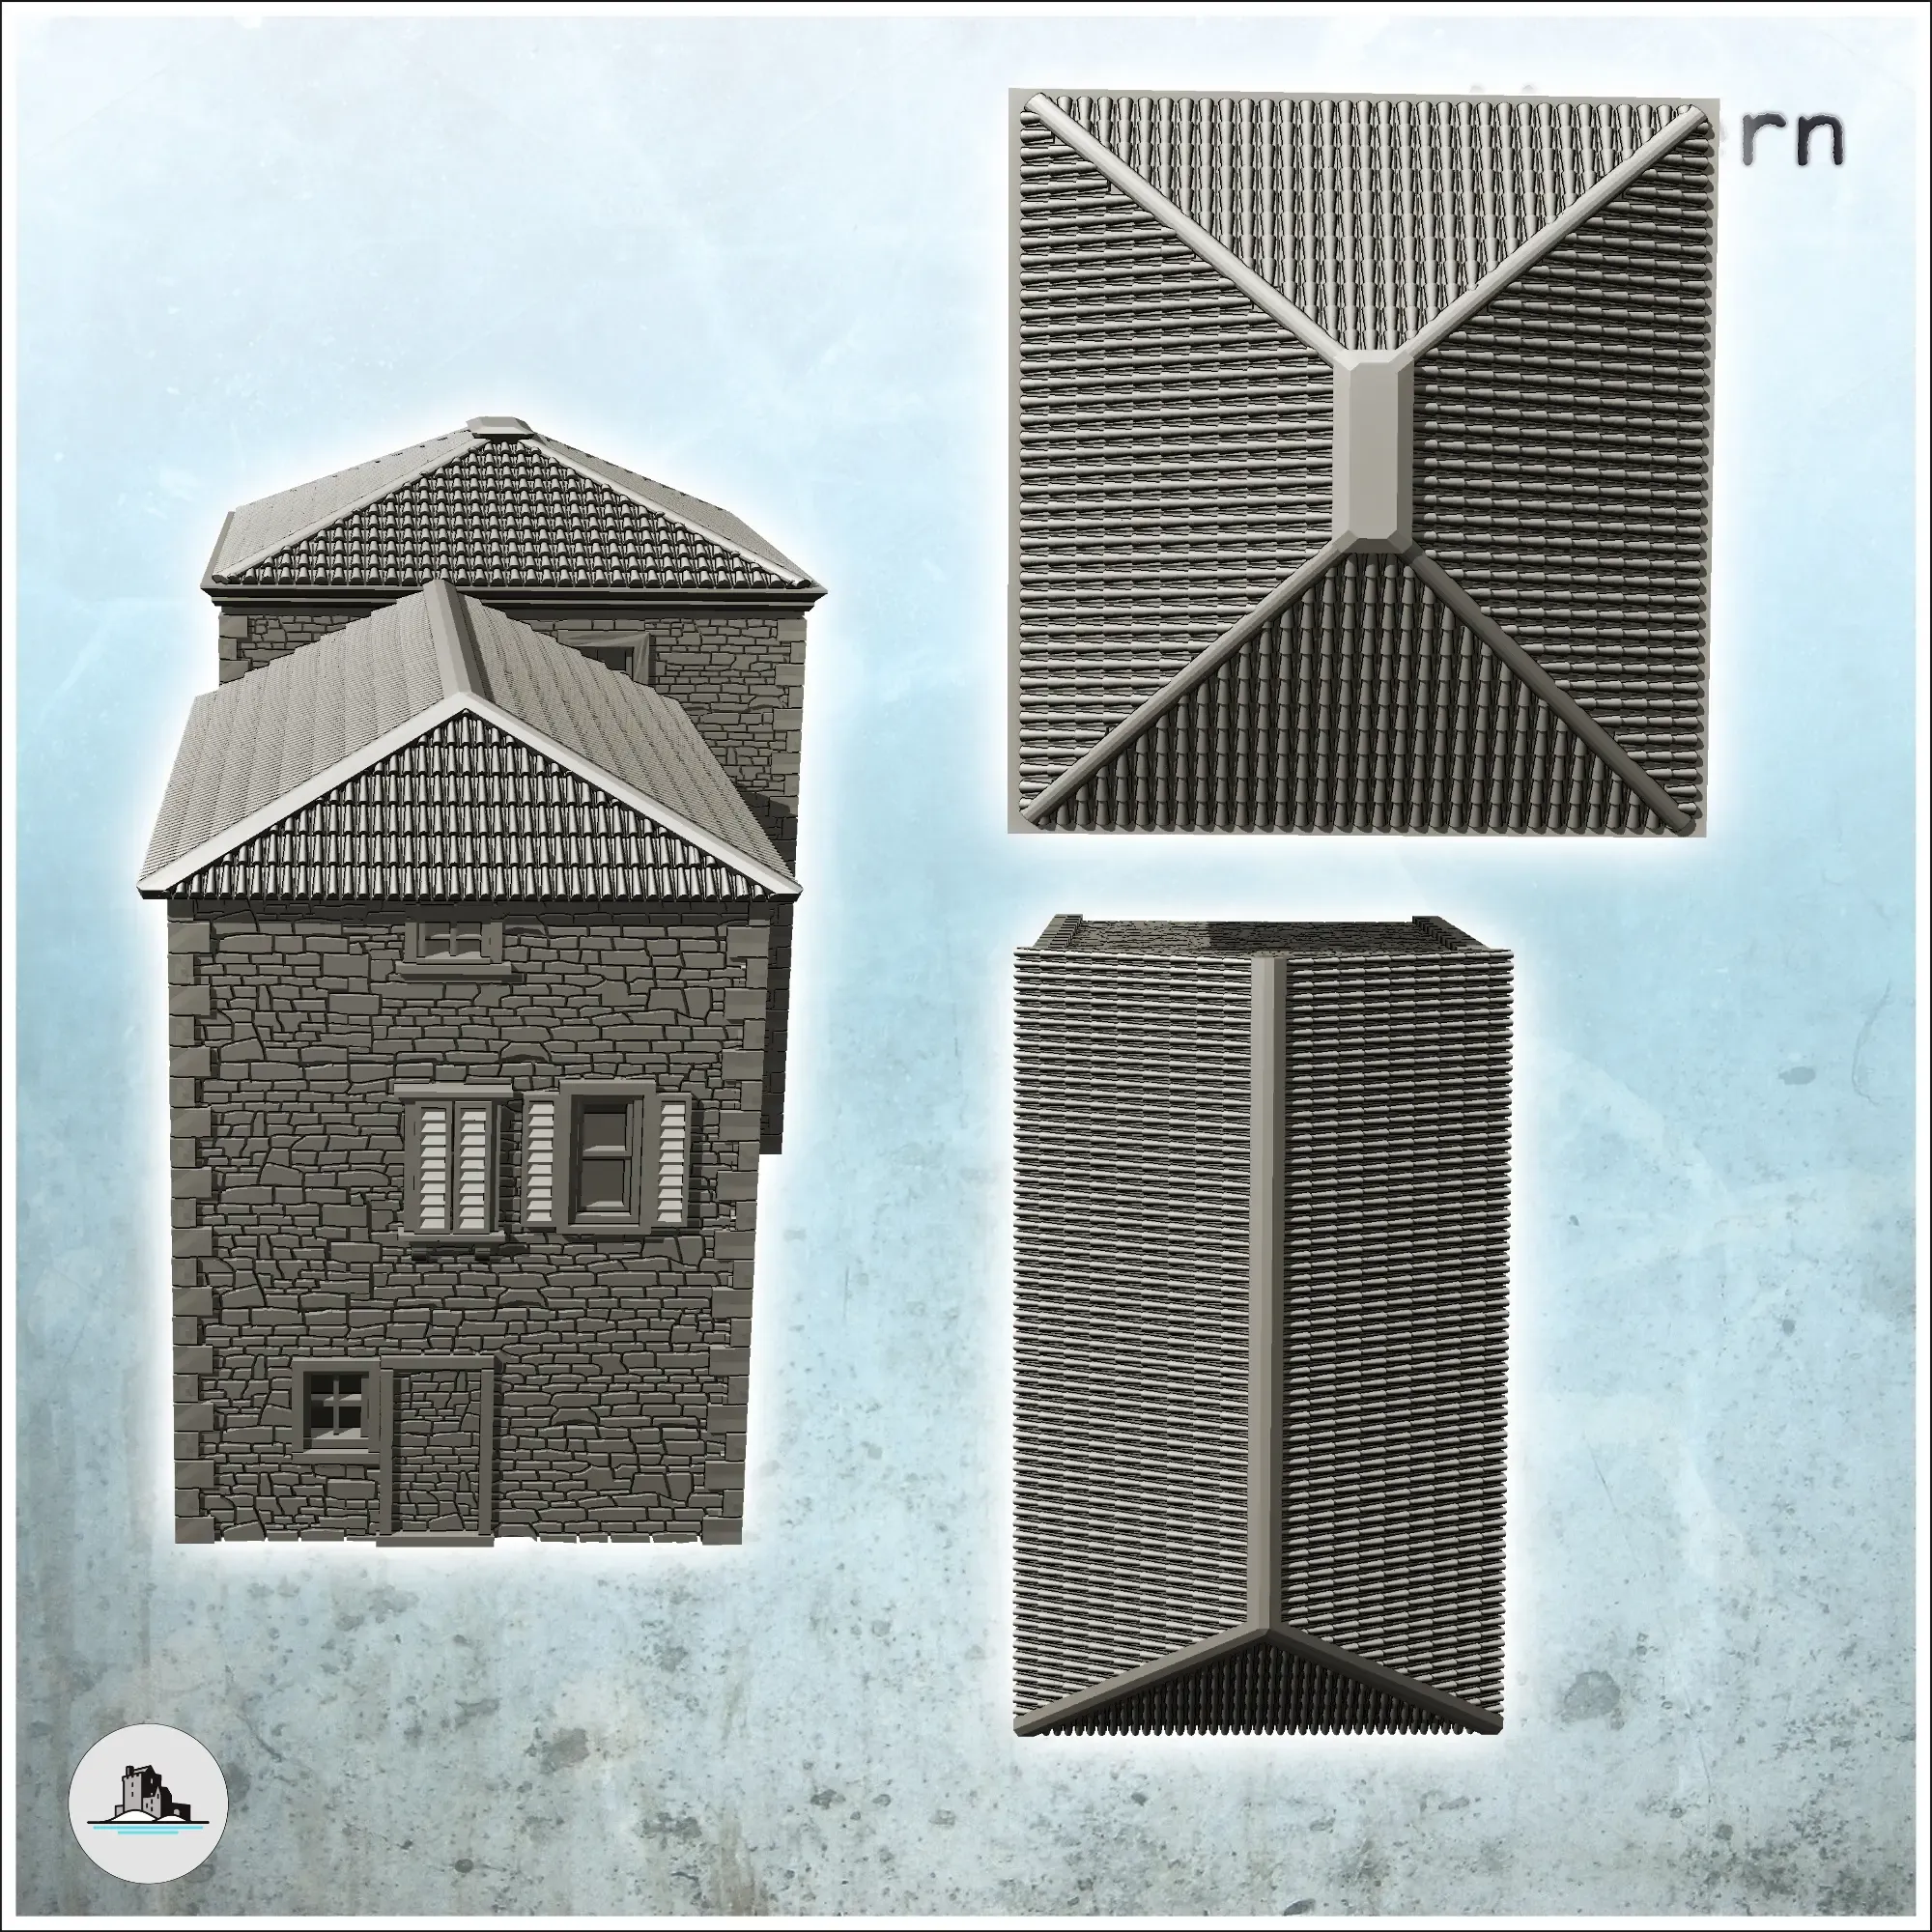 Set of two tiled roof houses with stone walls and shutters (